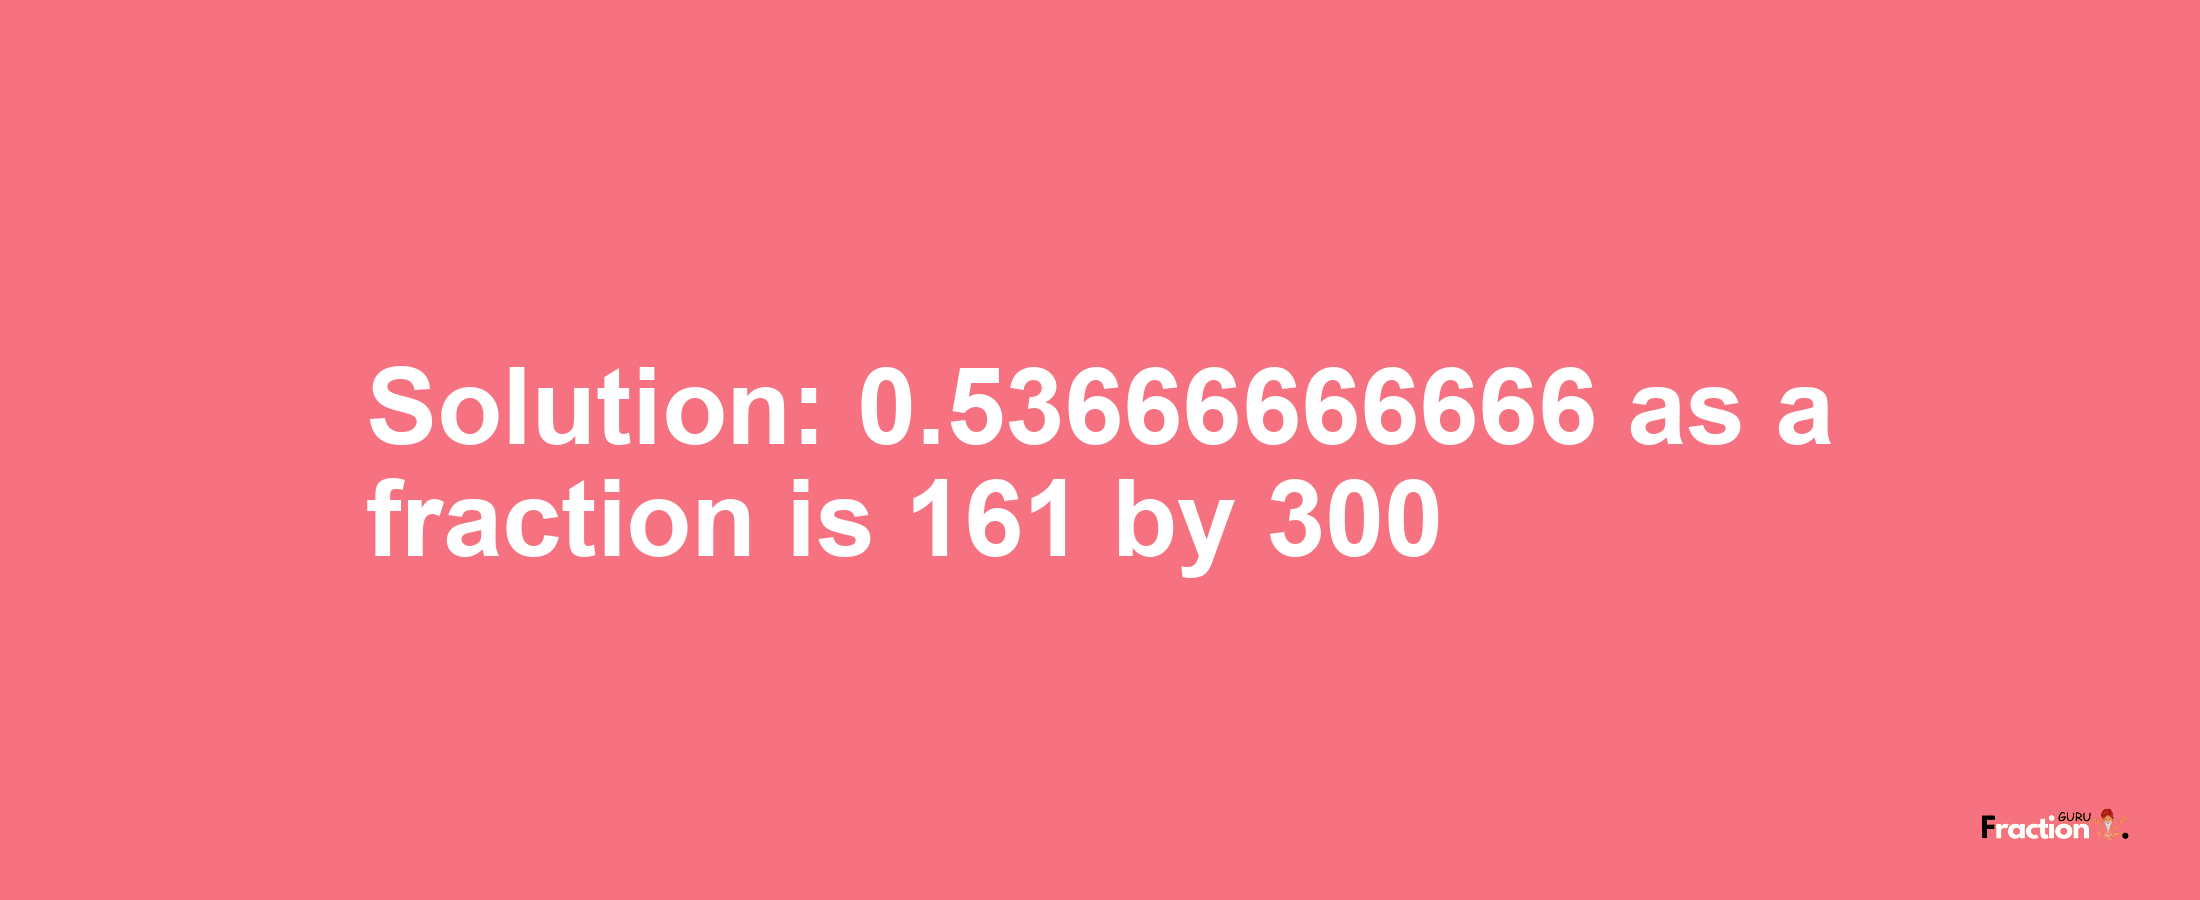 Solution:0.53666666666 as a fraction is 161/300